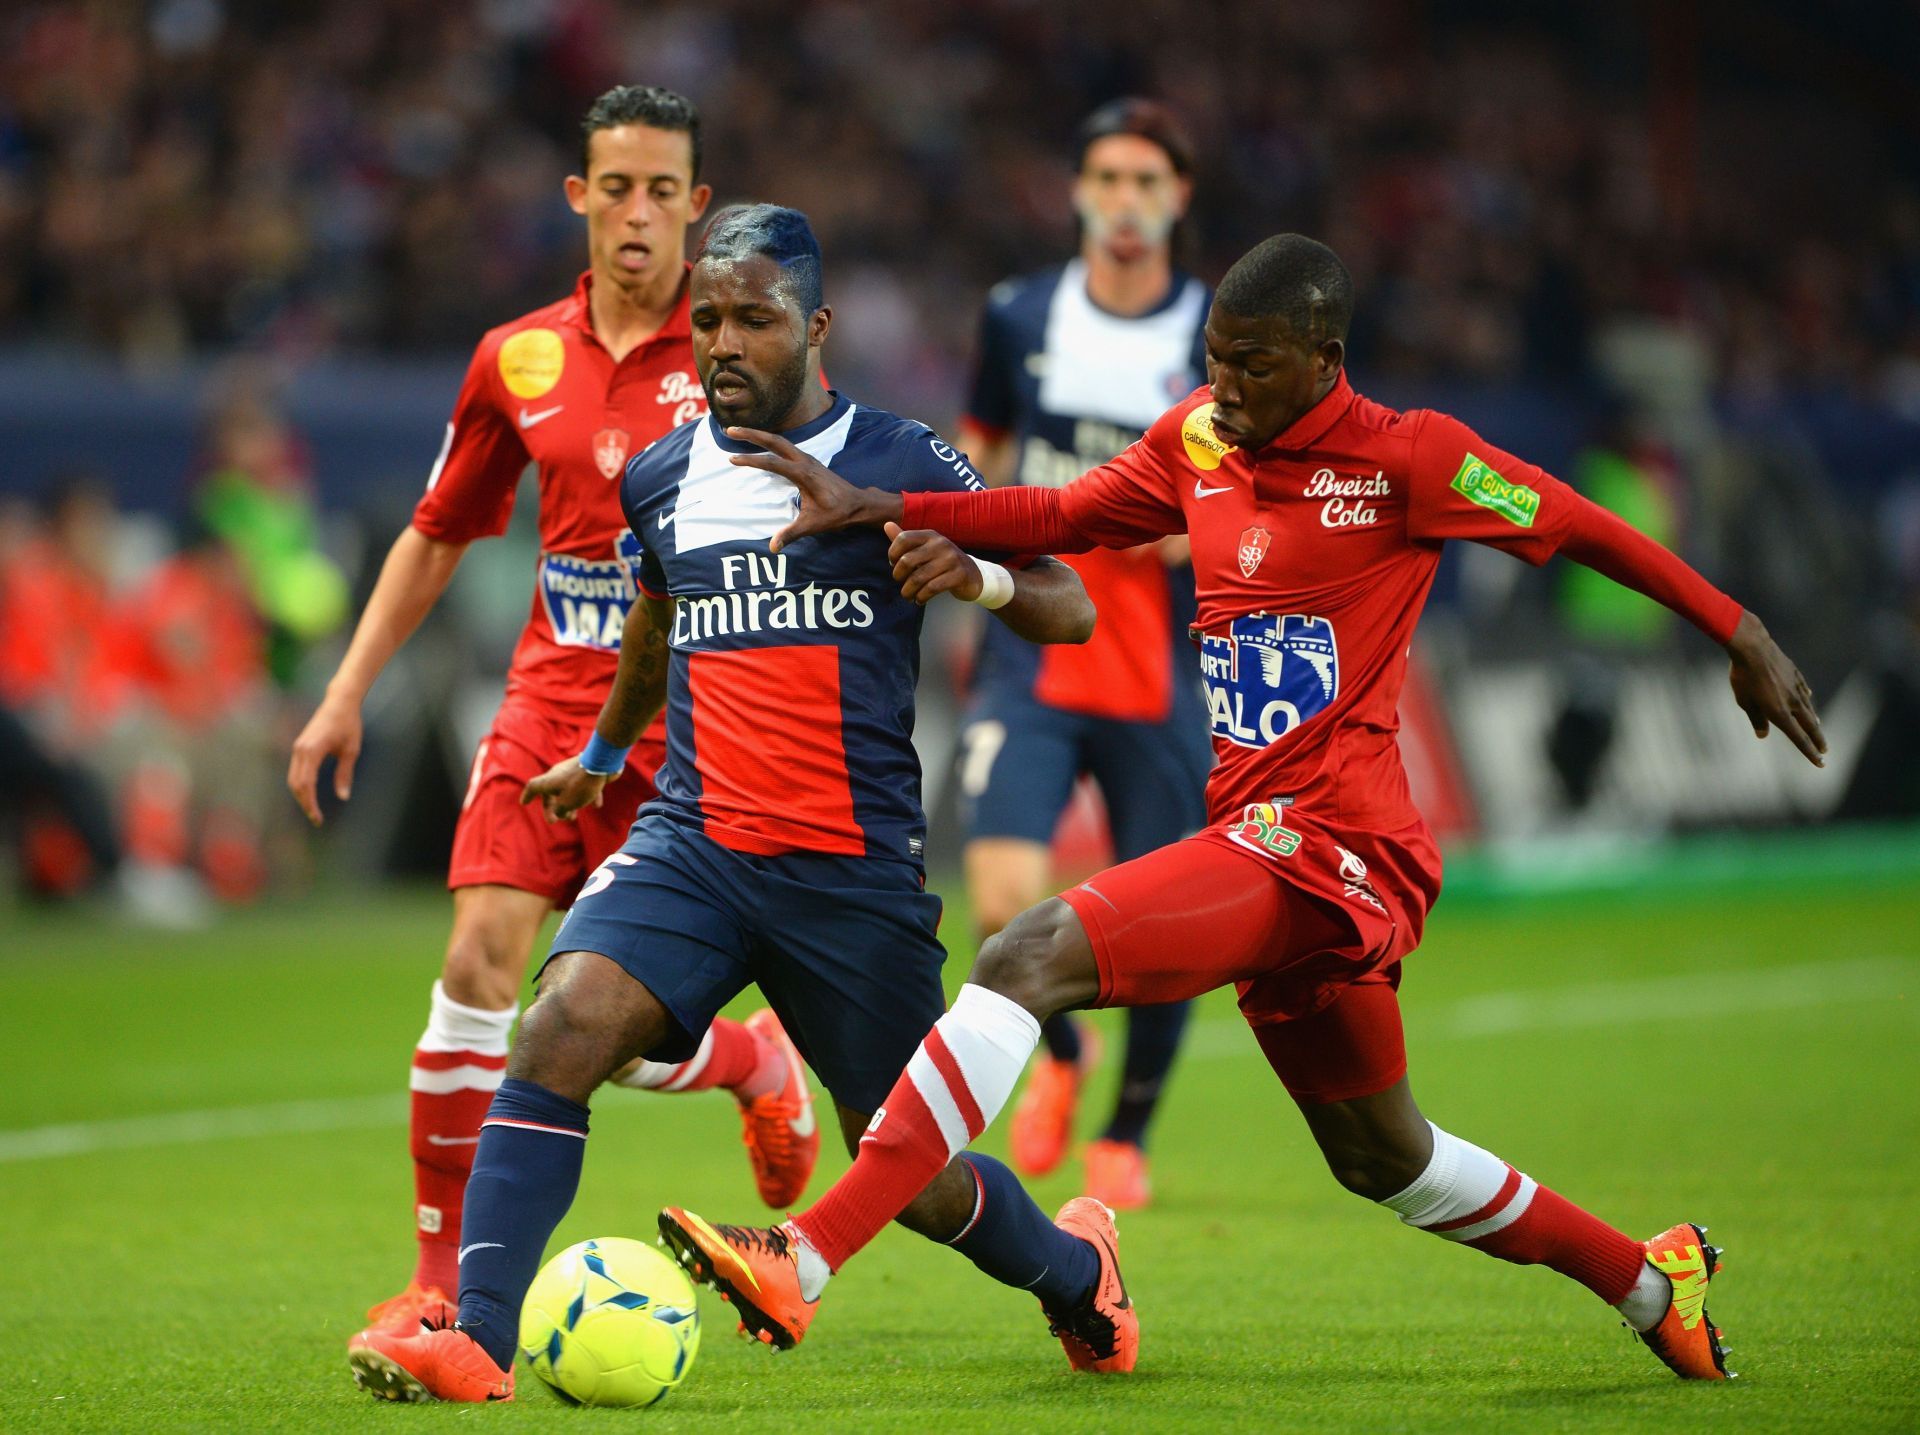 Stade Brestois play host to Clermont Foot on Sunday.